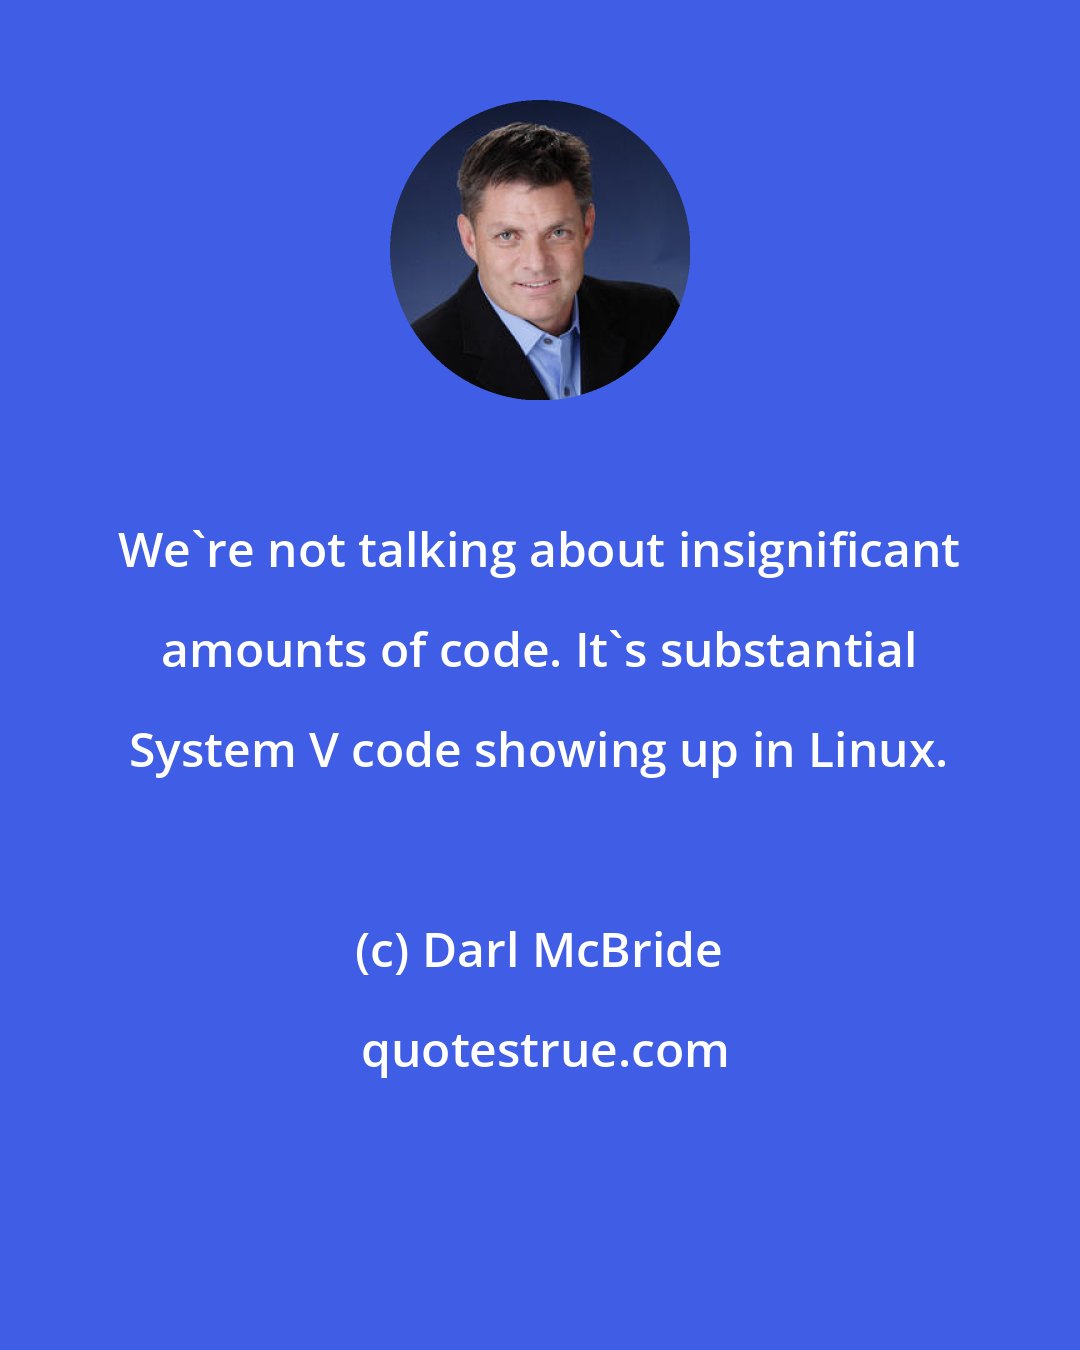 Darl McBride: We're not talking about insignificant amounts of code. It's substantial System V code showing up in Linux.